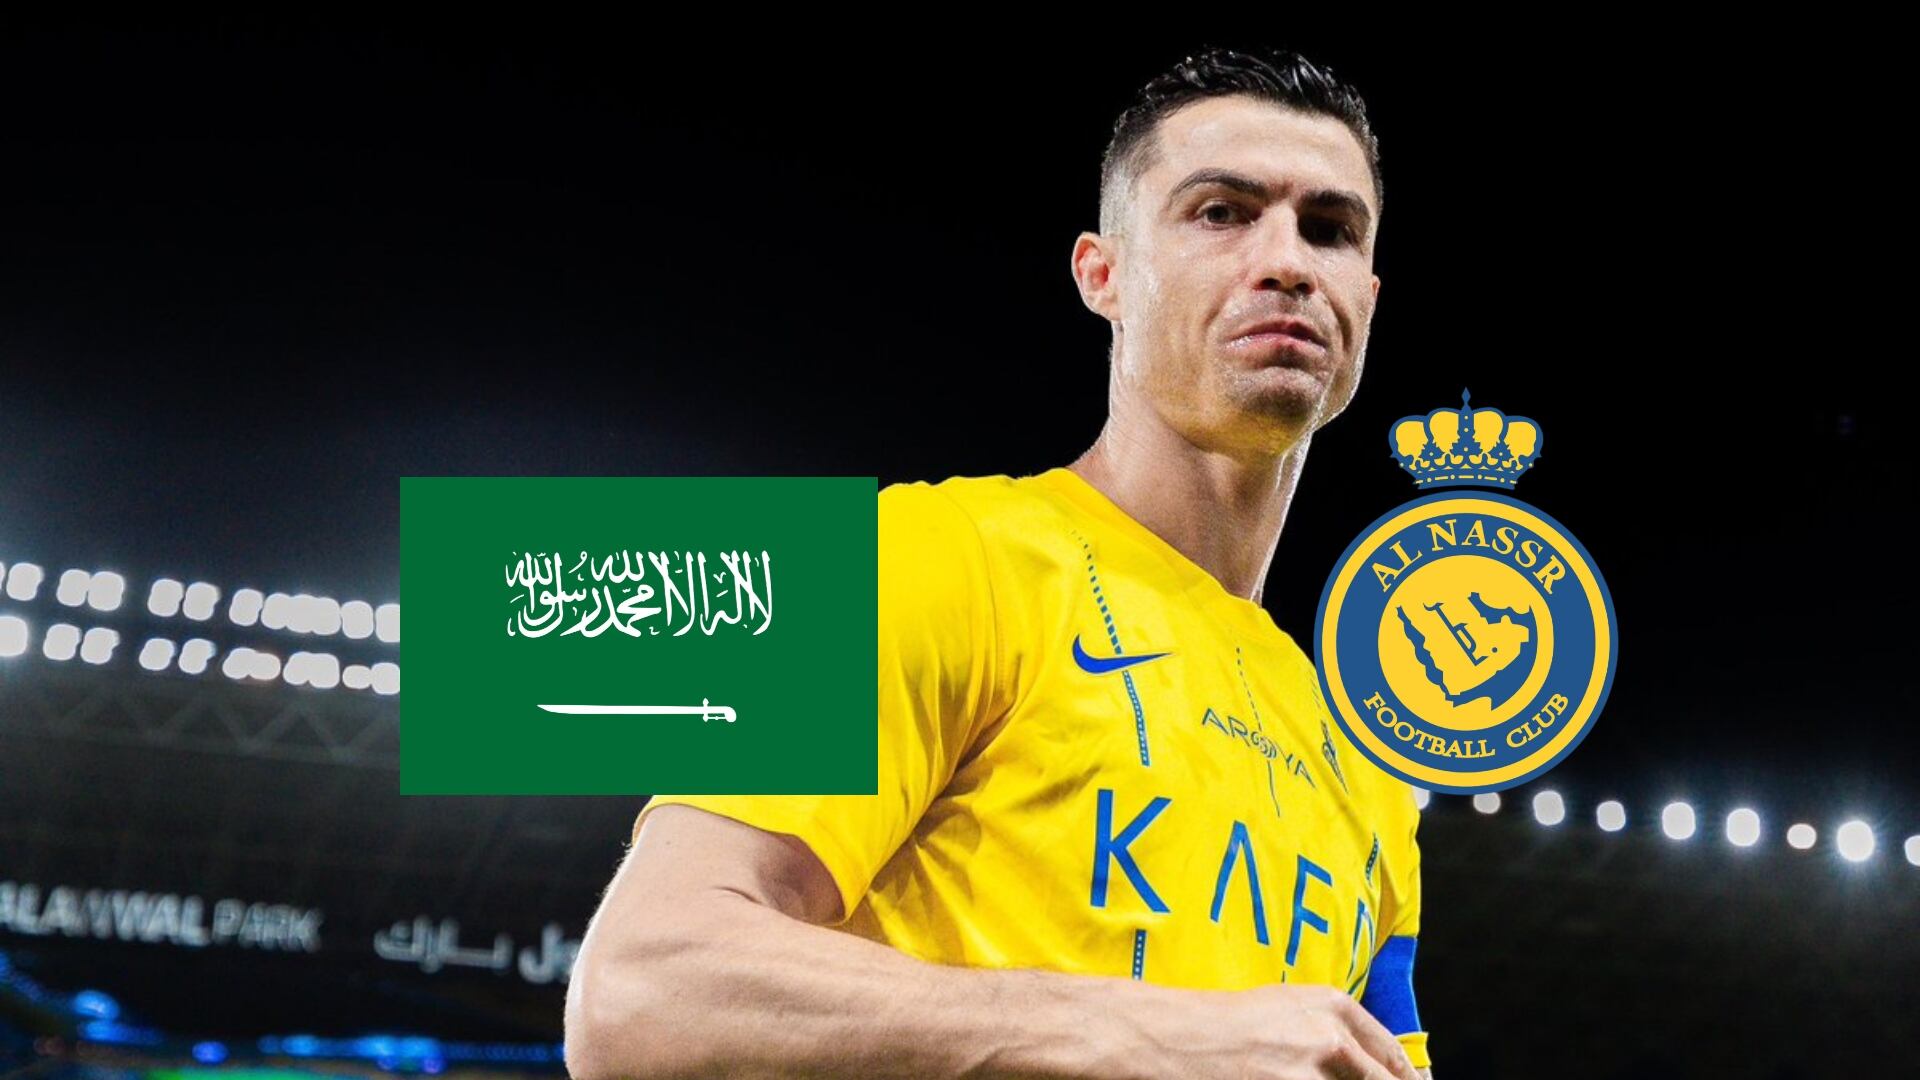 In Saudi they angered Cristiano again, the new procedure they would take with CR7 before his next game with Al Nassr